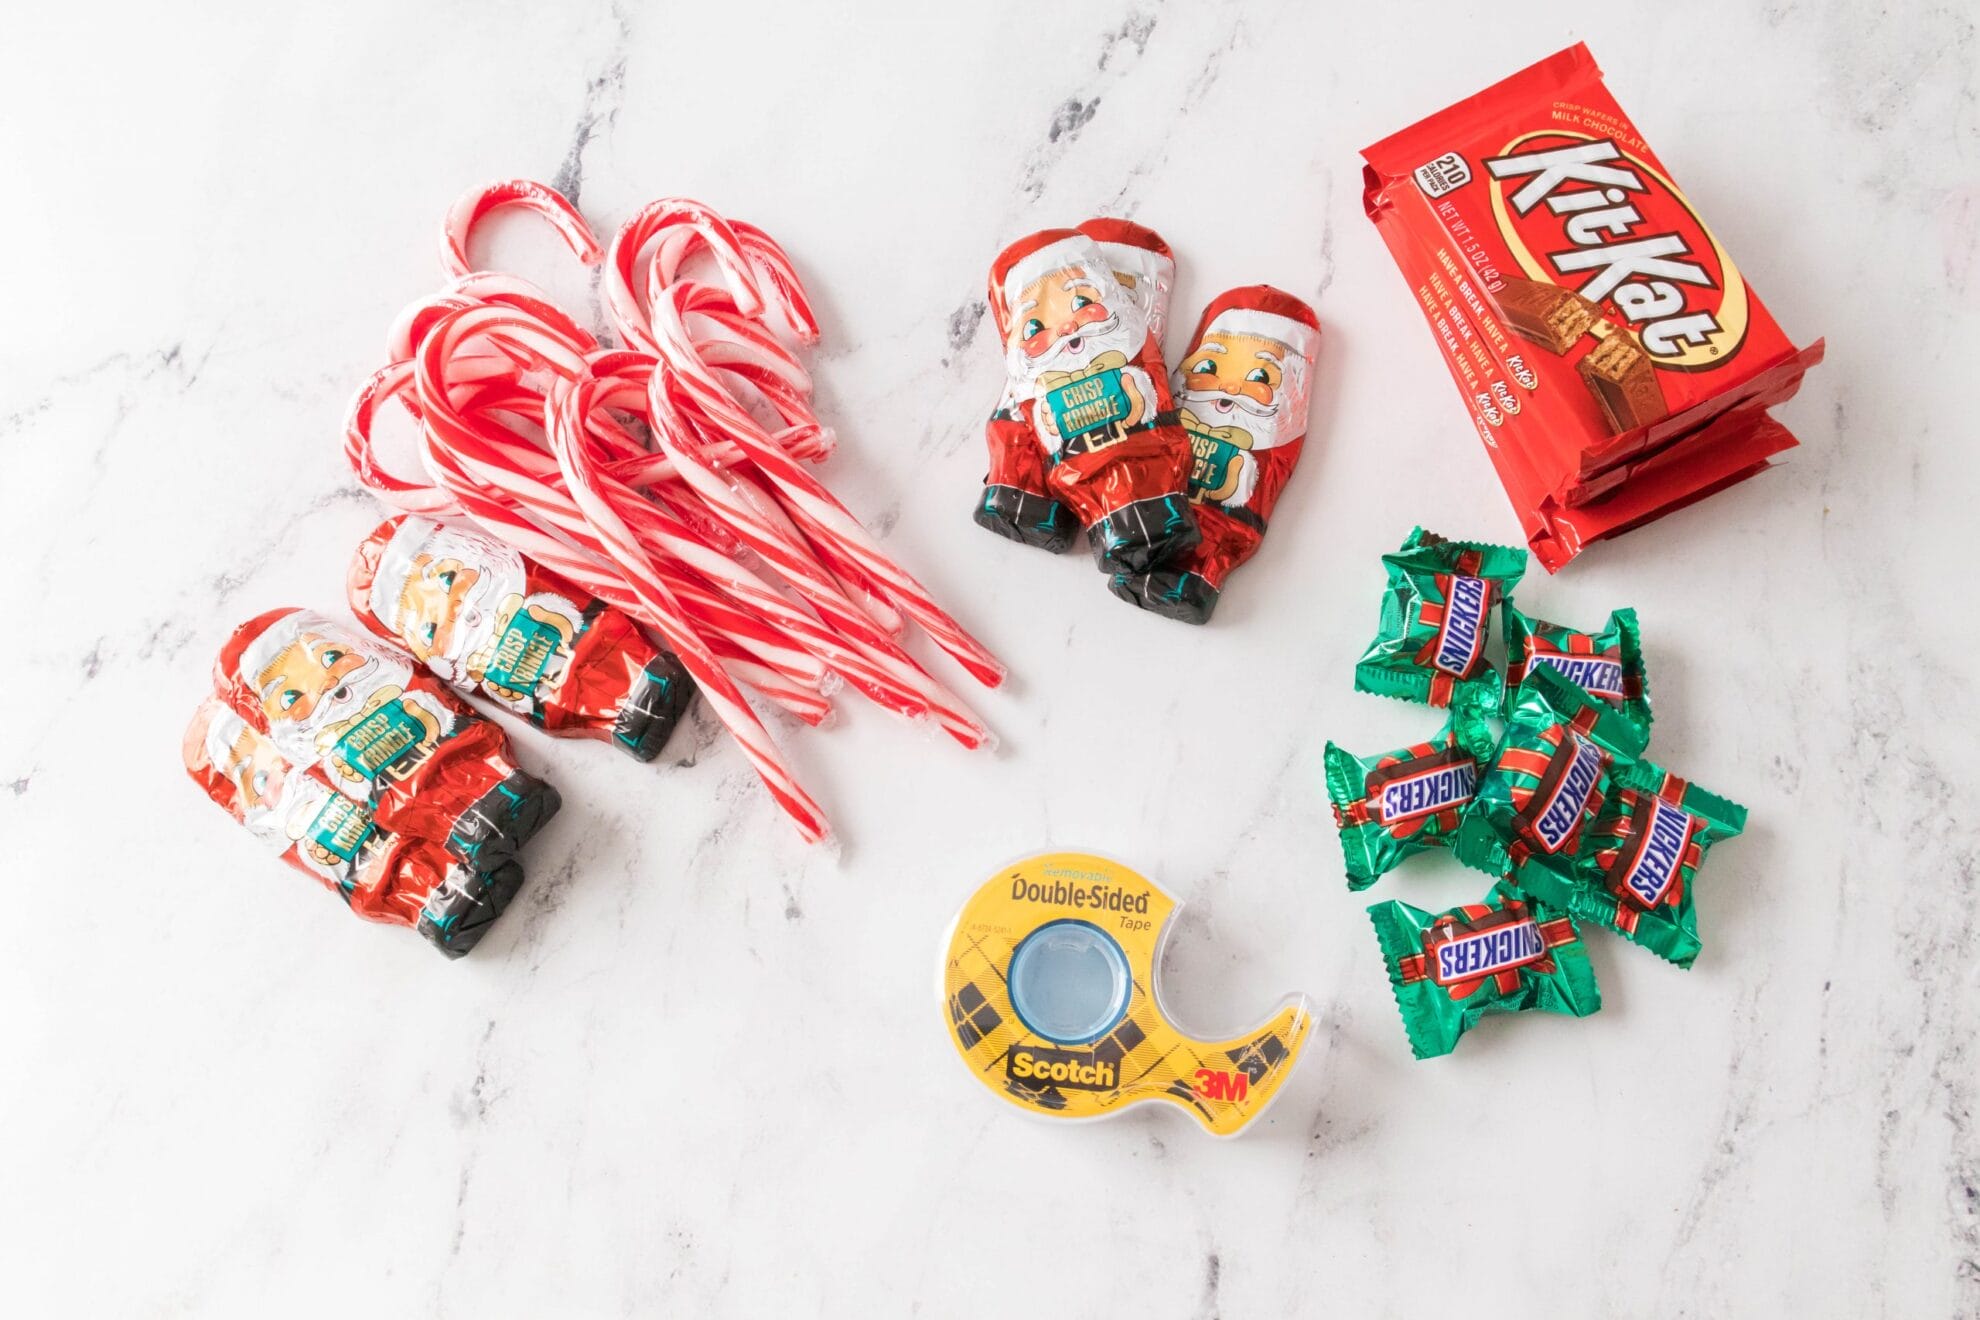 candy canes, chocolate santas, double sided tape, snickers and kit kats on marble surface